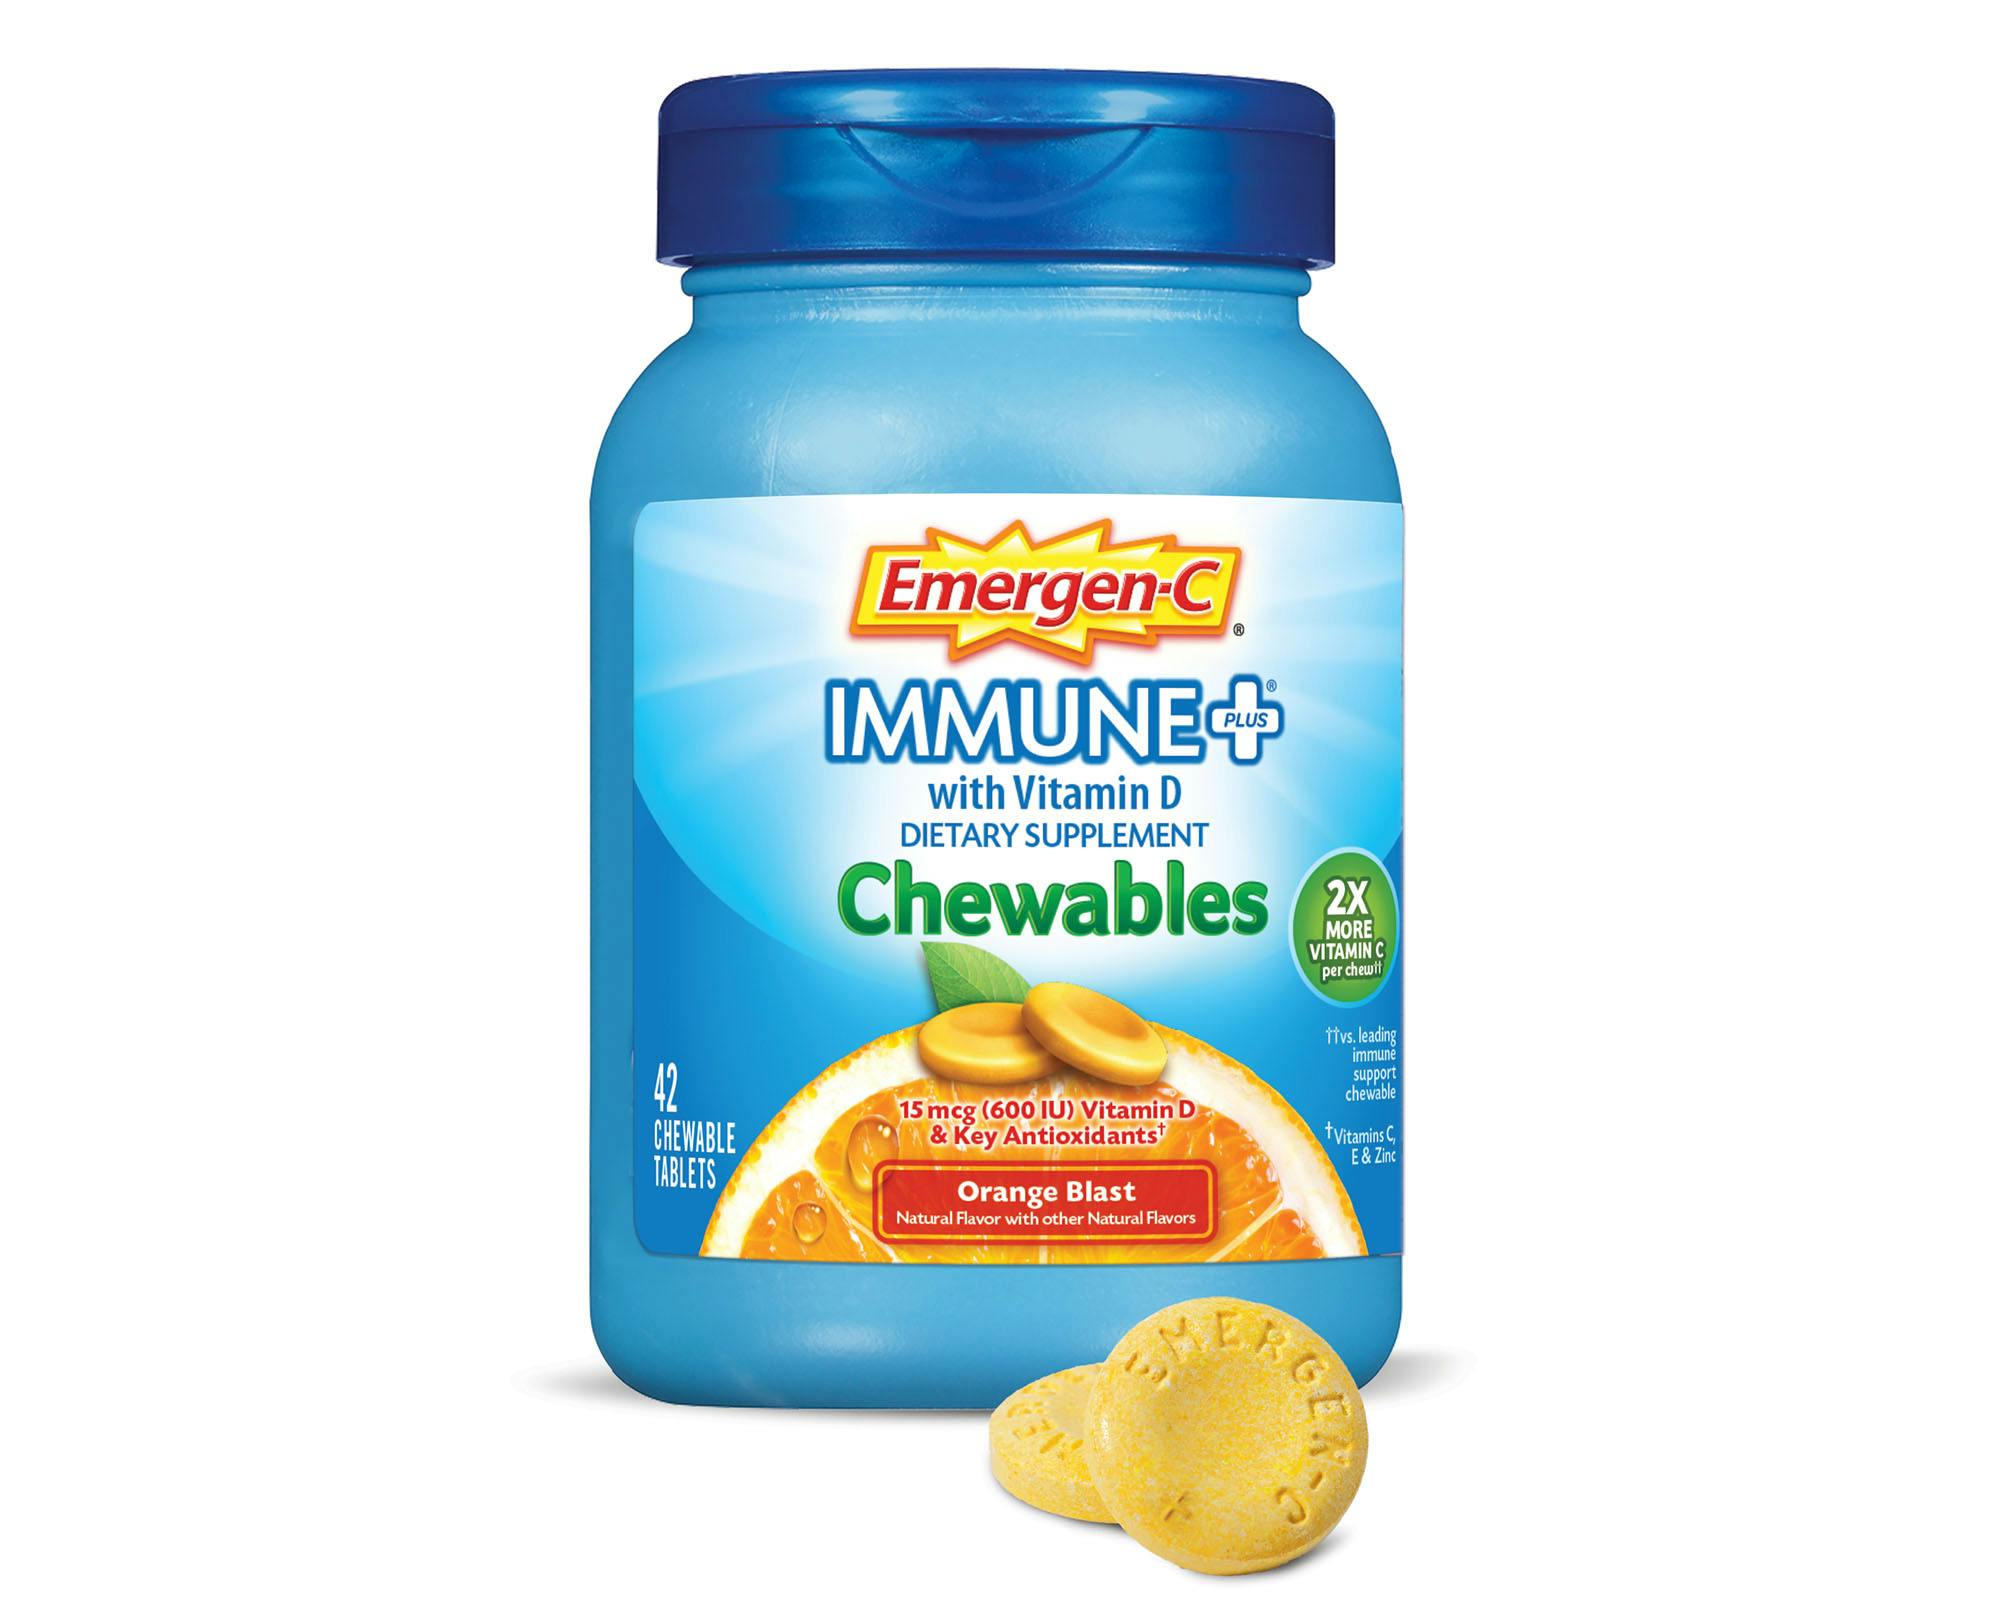 Orange Blast Immune+ Support Chewables bottle with chewables grouping